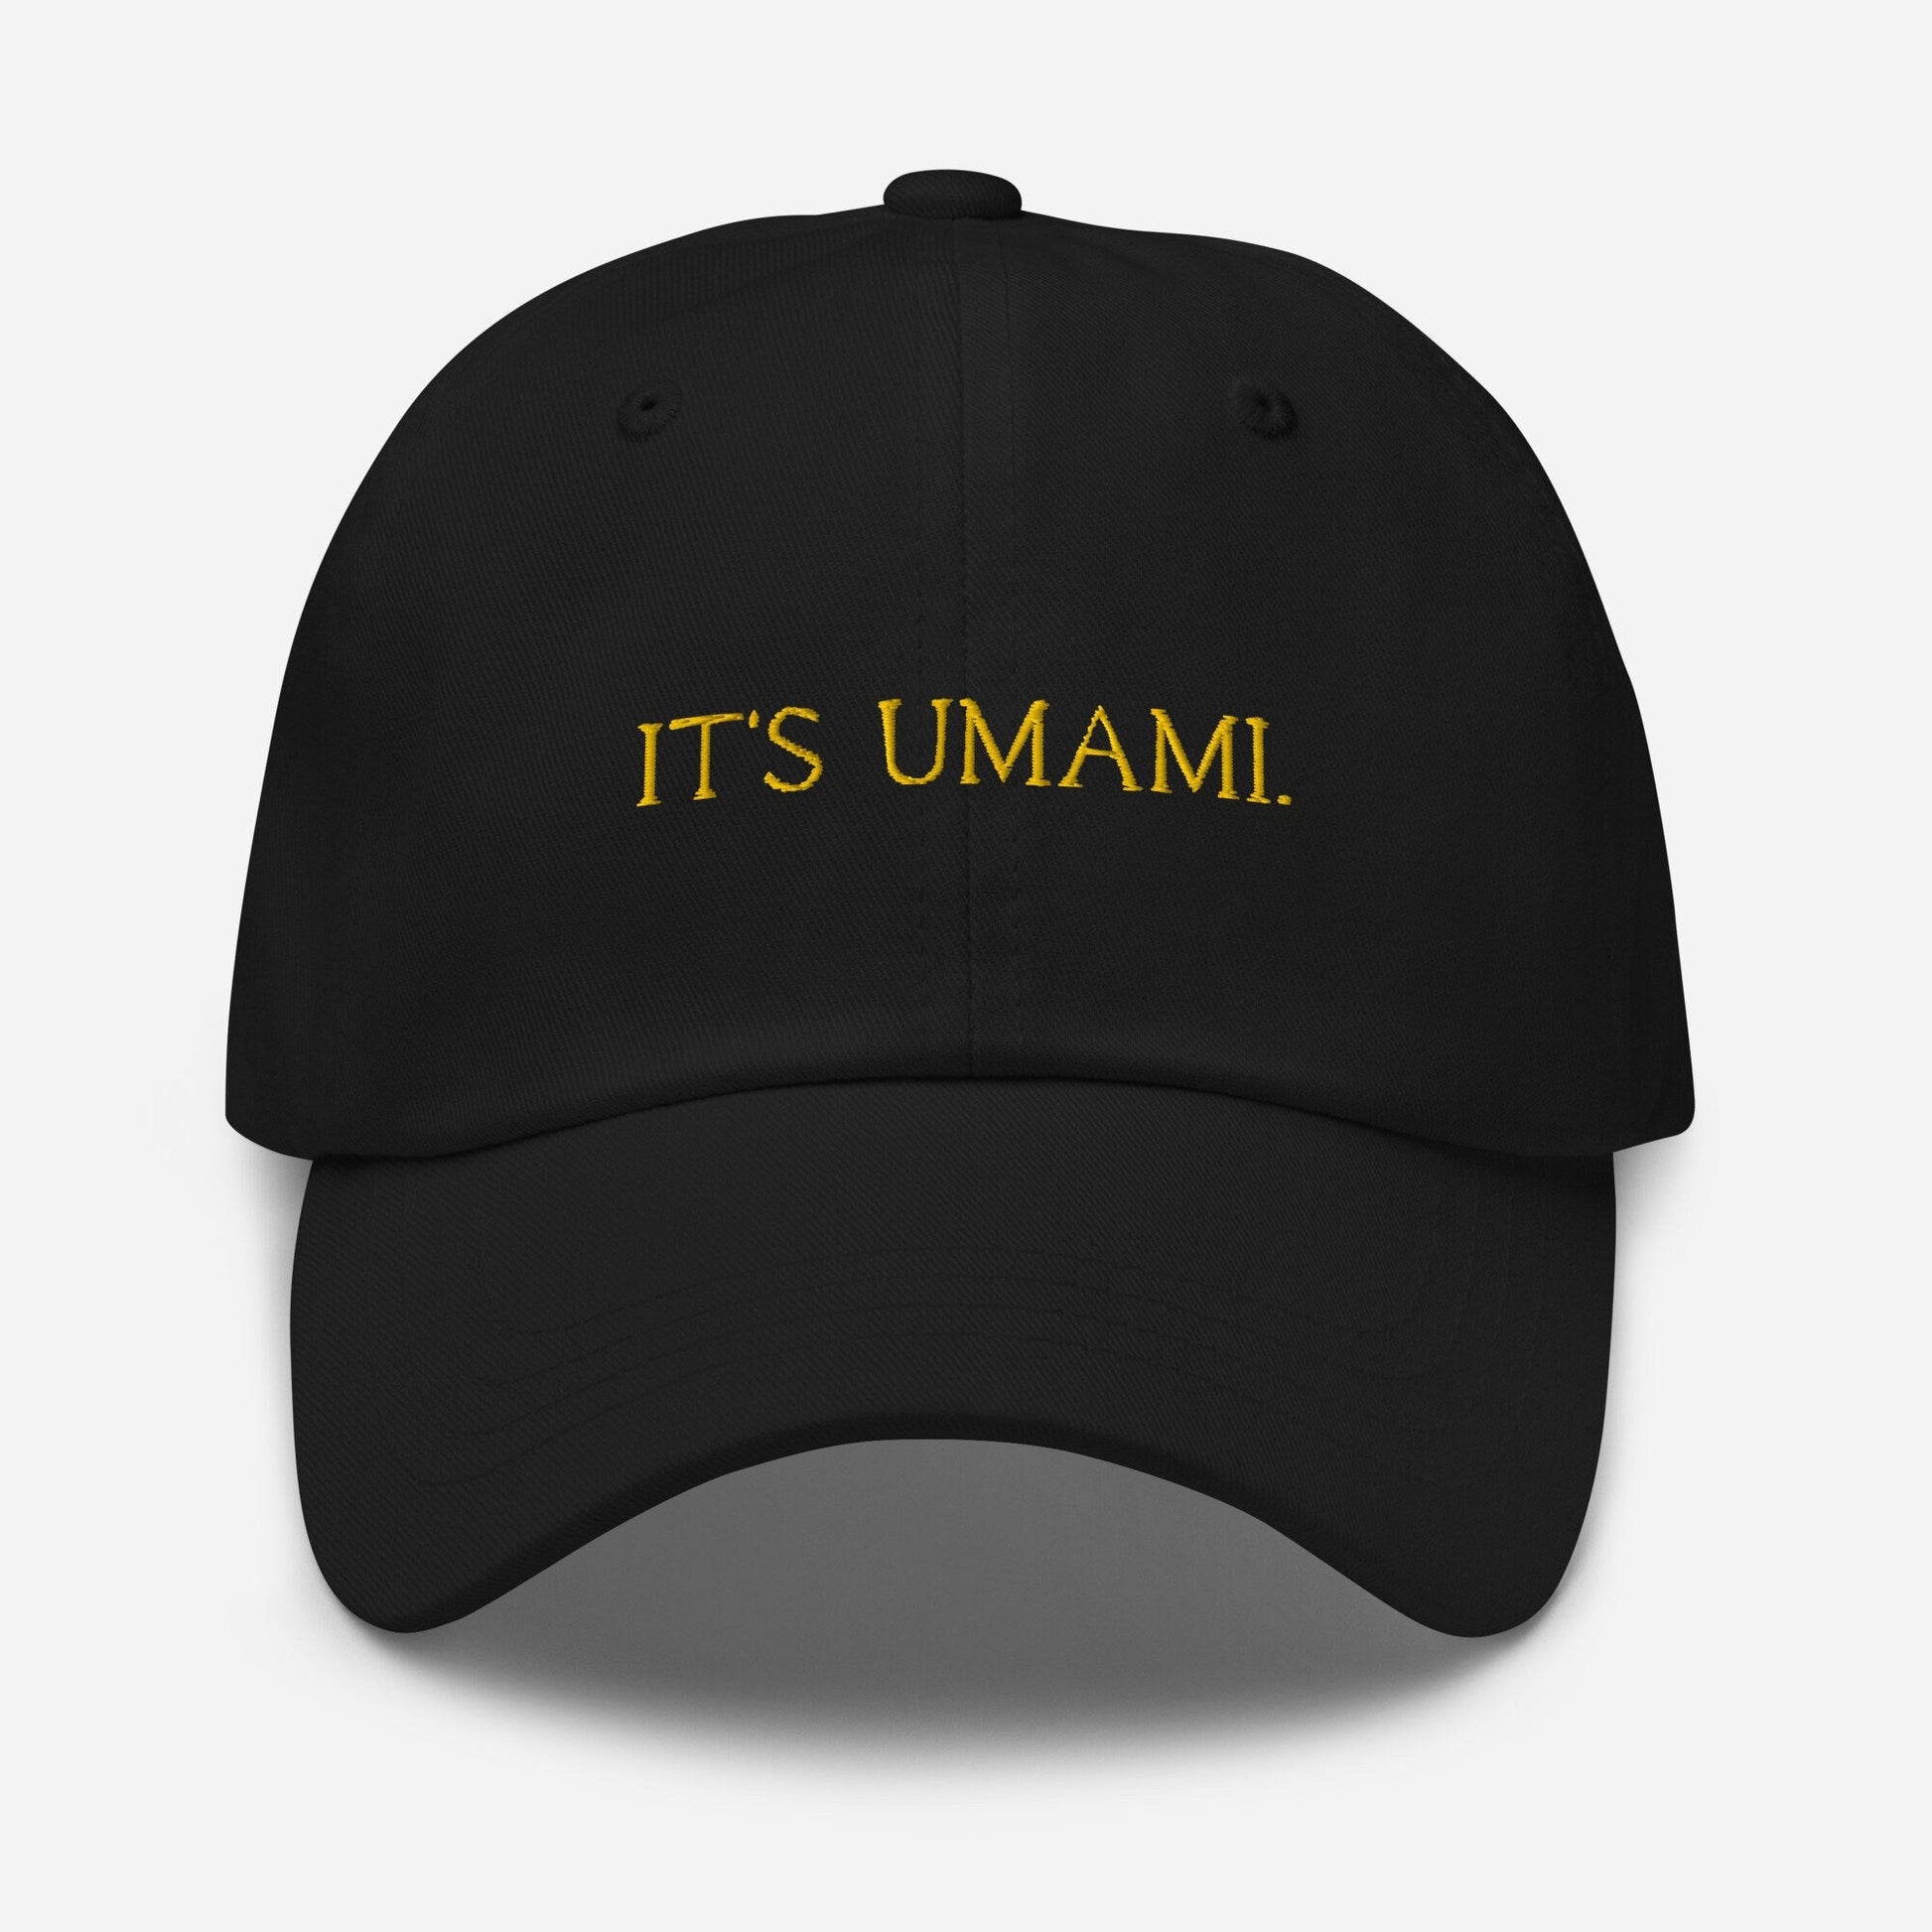 Umami Dad Hat - Gift for home chef and foodies - Handmade Custom Embroidered Cotton Cap - Evilwater Originals